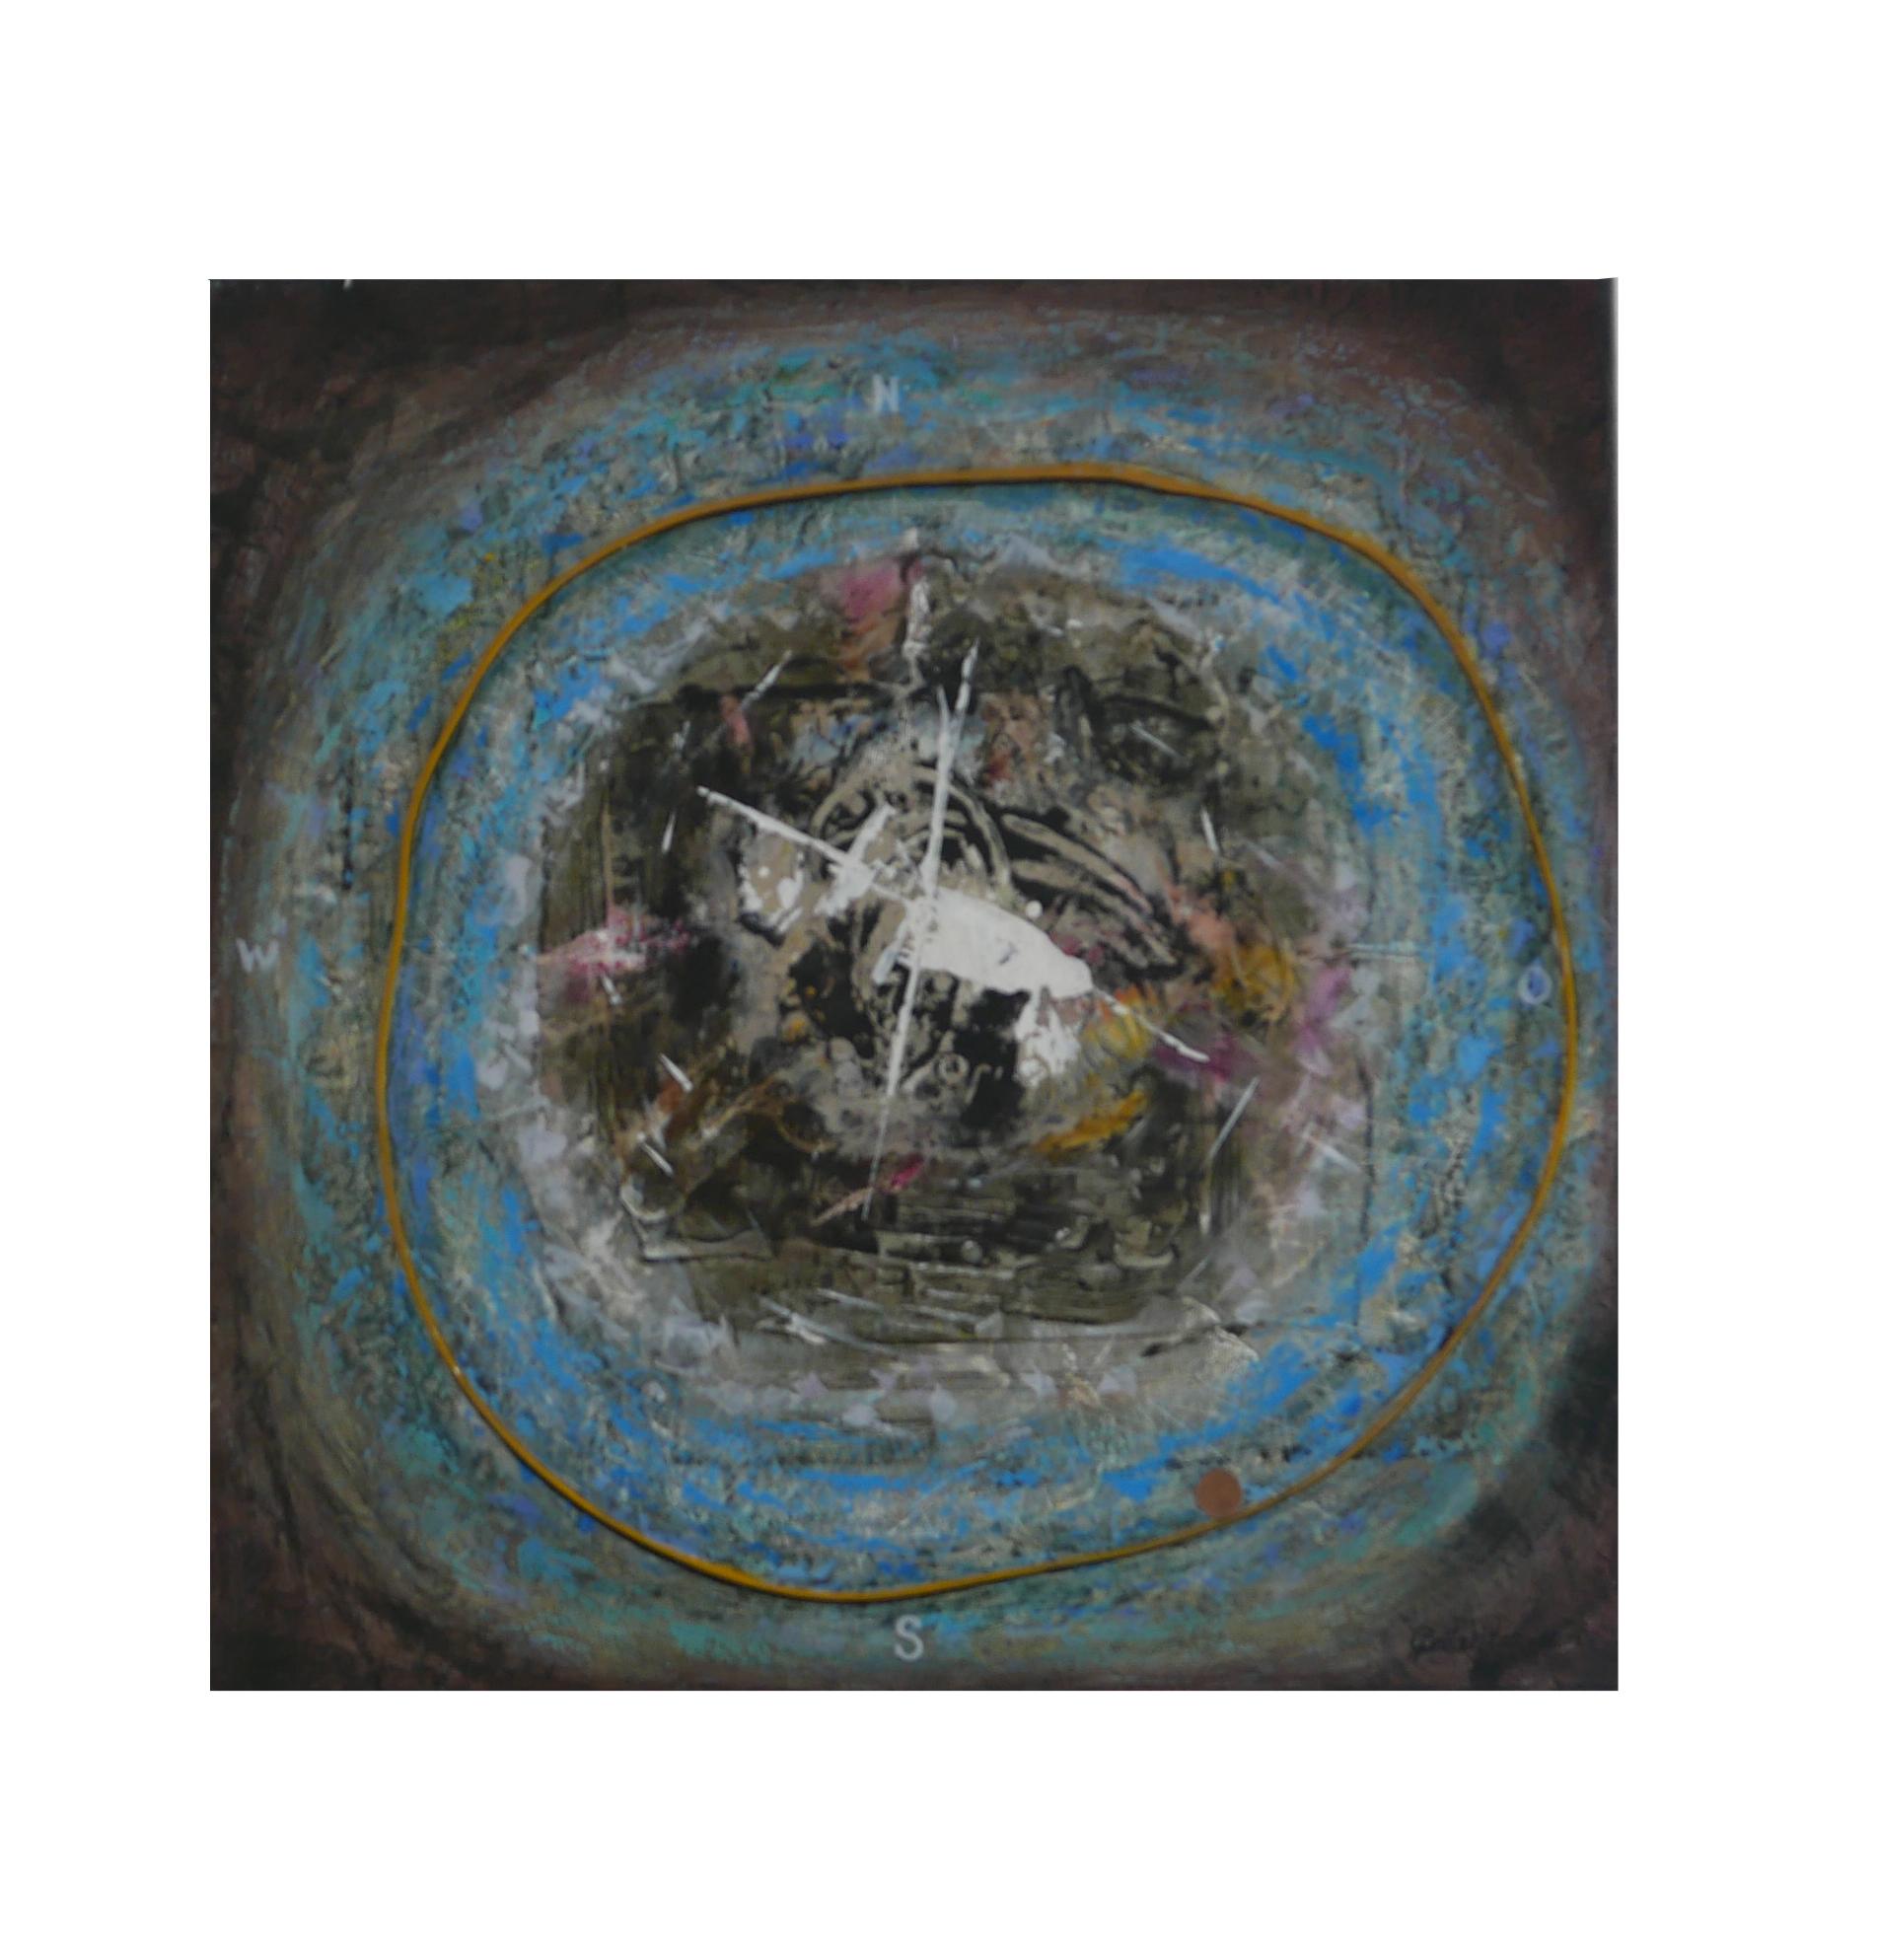 Milky Way - painting, found objects, compass, circular, blue, gold, abstract - Painting by Gogi Gelantia